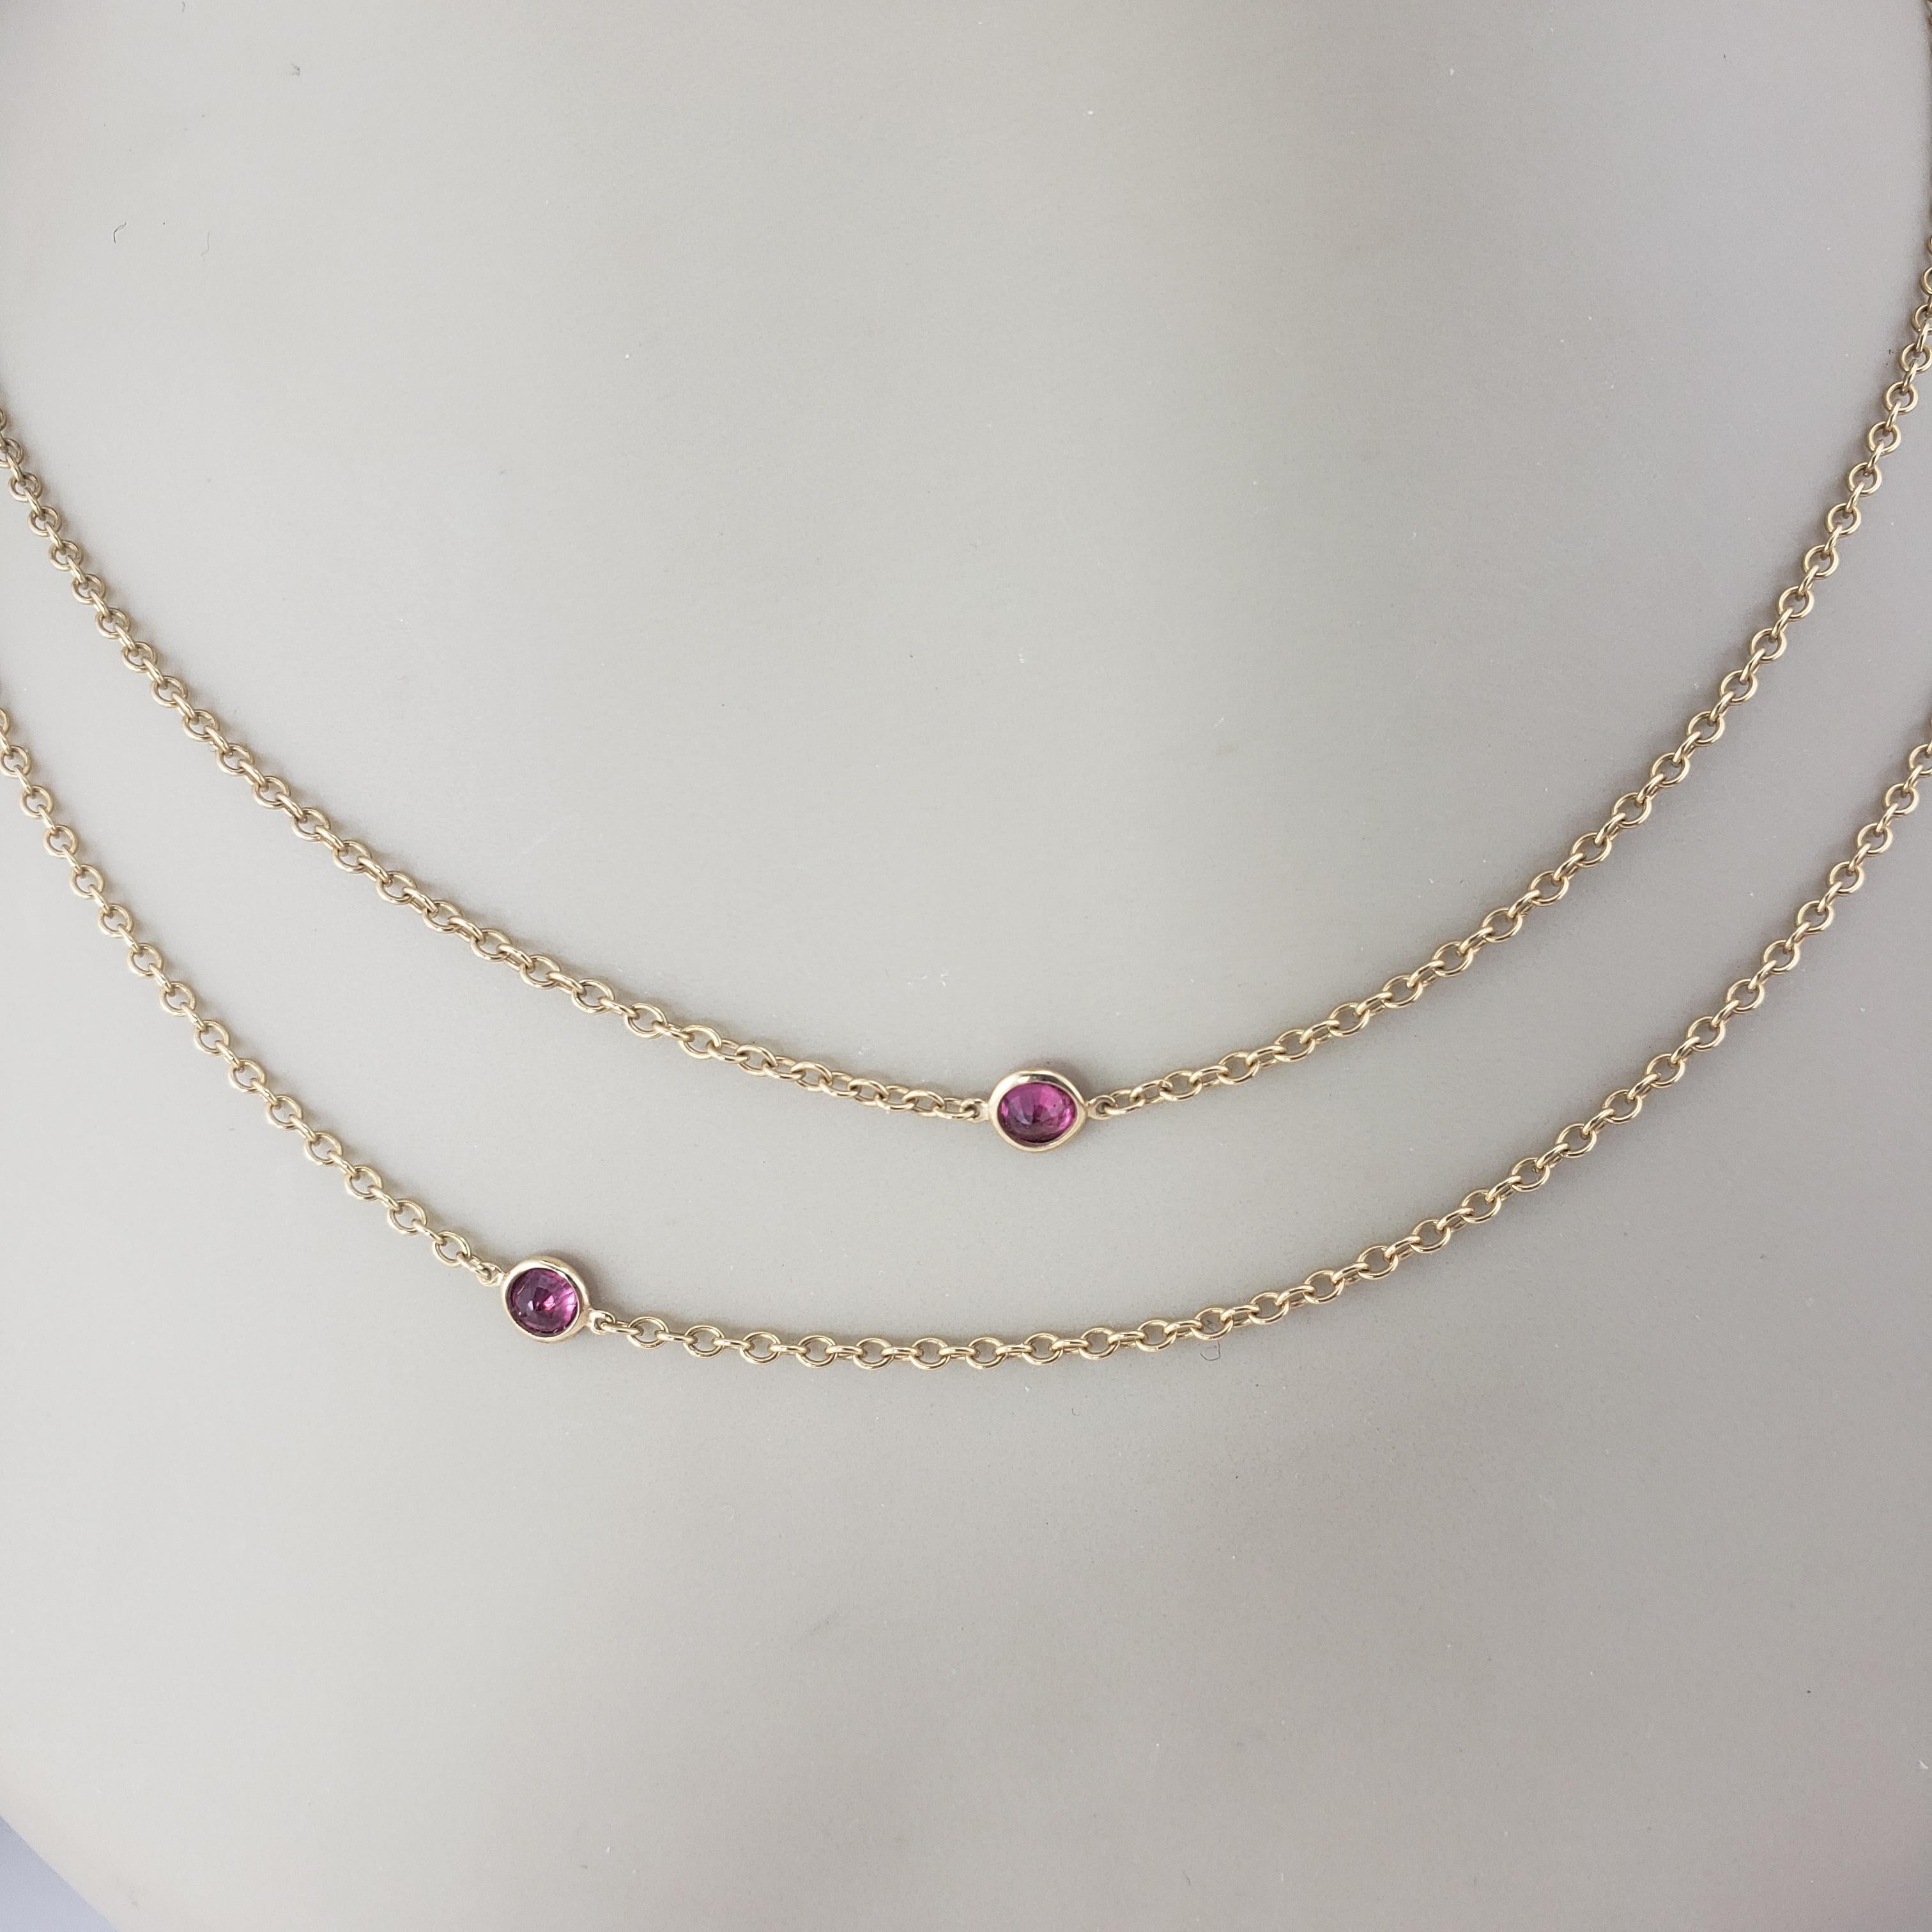 Tiffany & Co. 18K Gold Elsa Peretti Color by the Yard Ruby Necklace #17225 For Sale 3